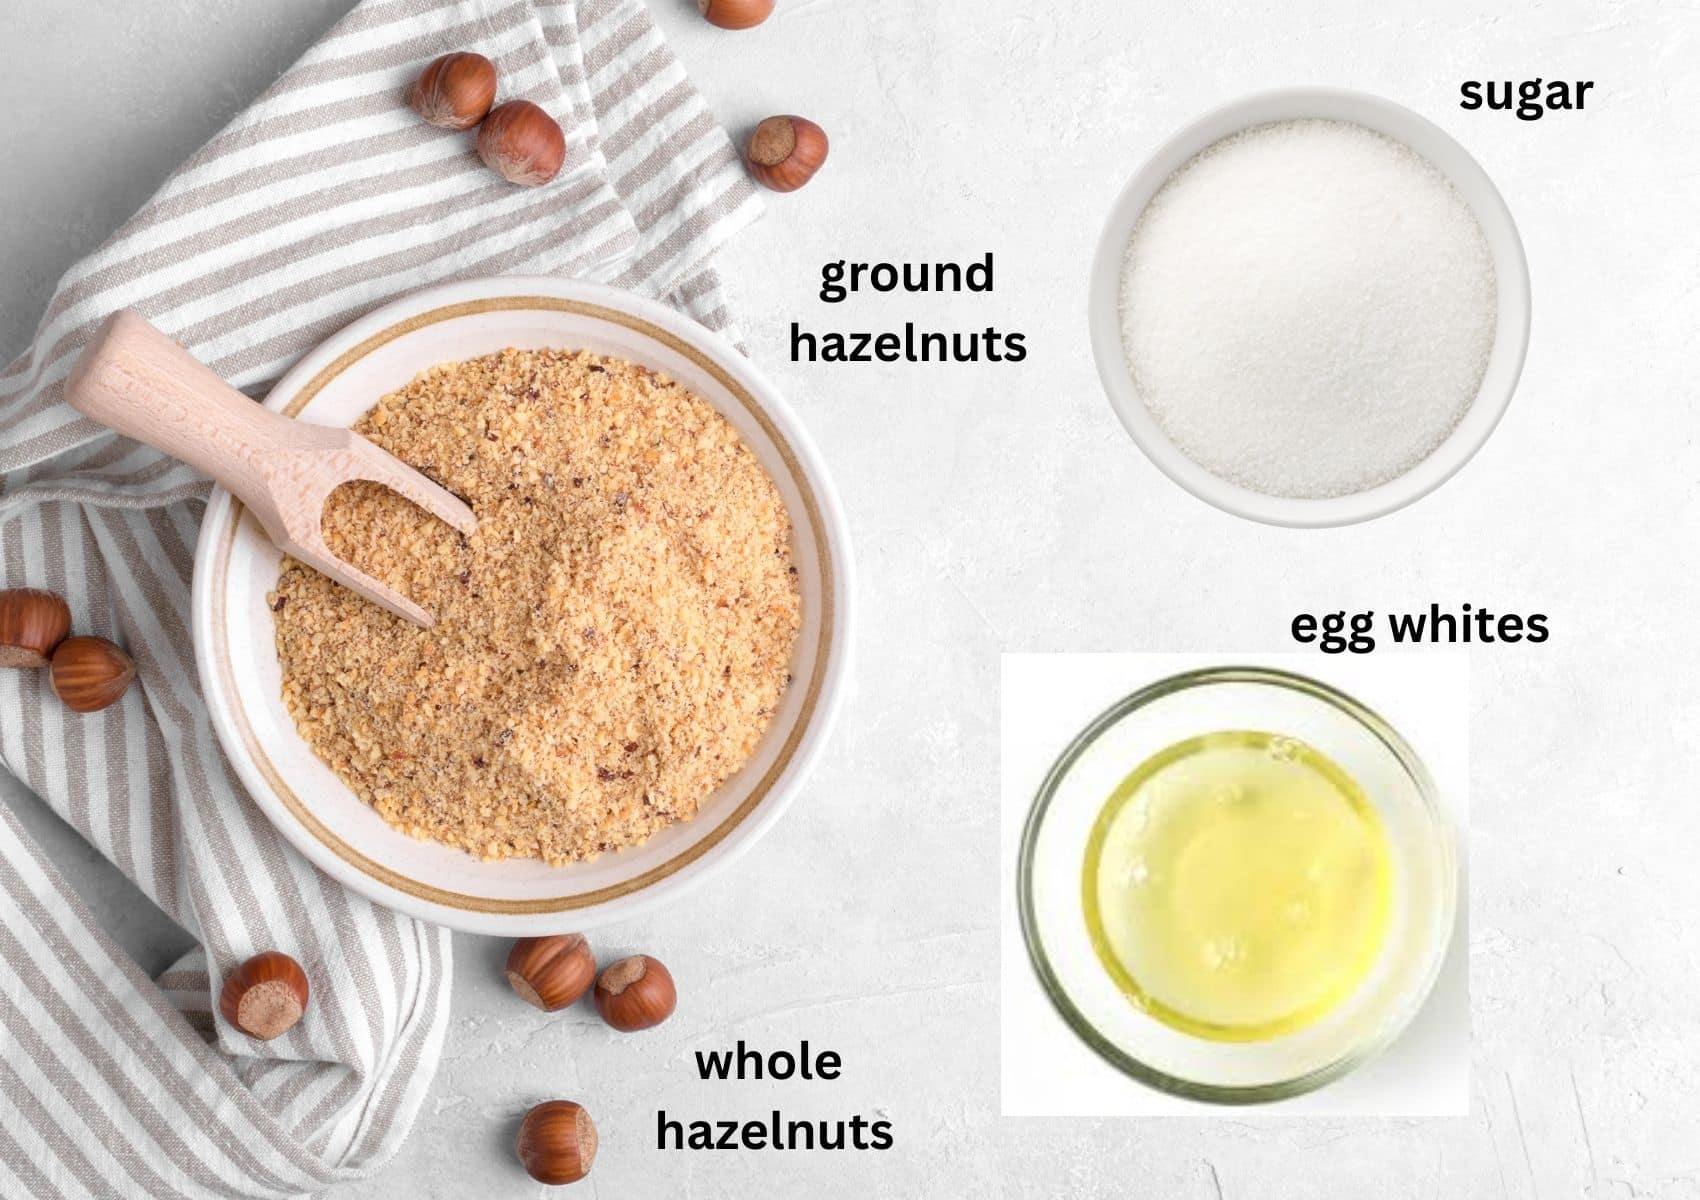 ground hazelnuts, sugar and egg whites in bowls, all labeled ingredients for macaroons.